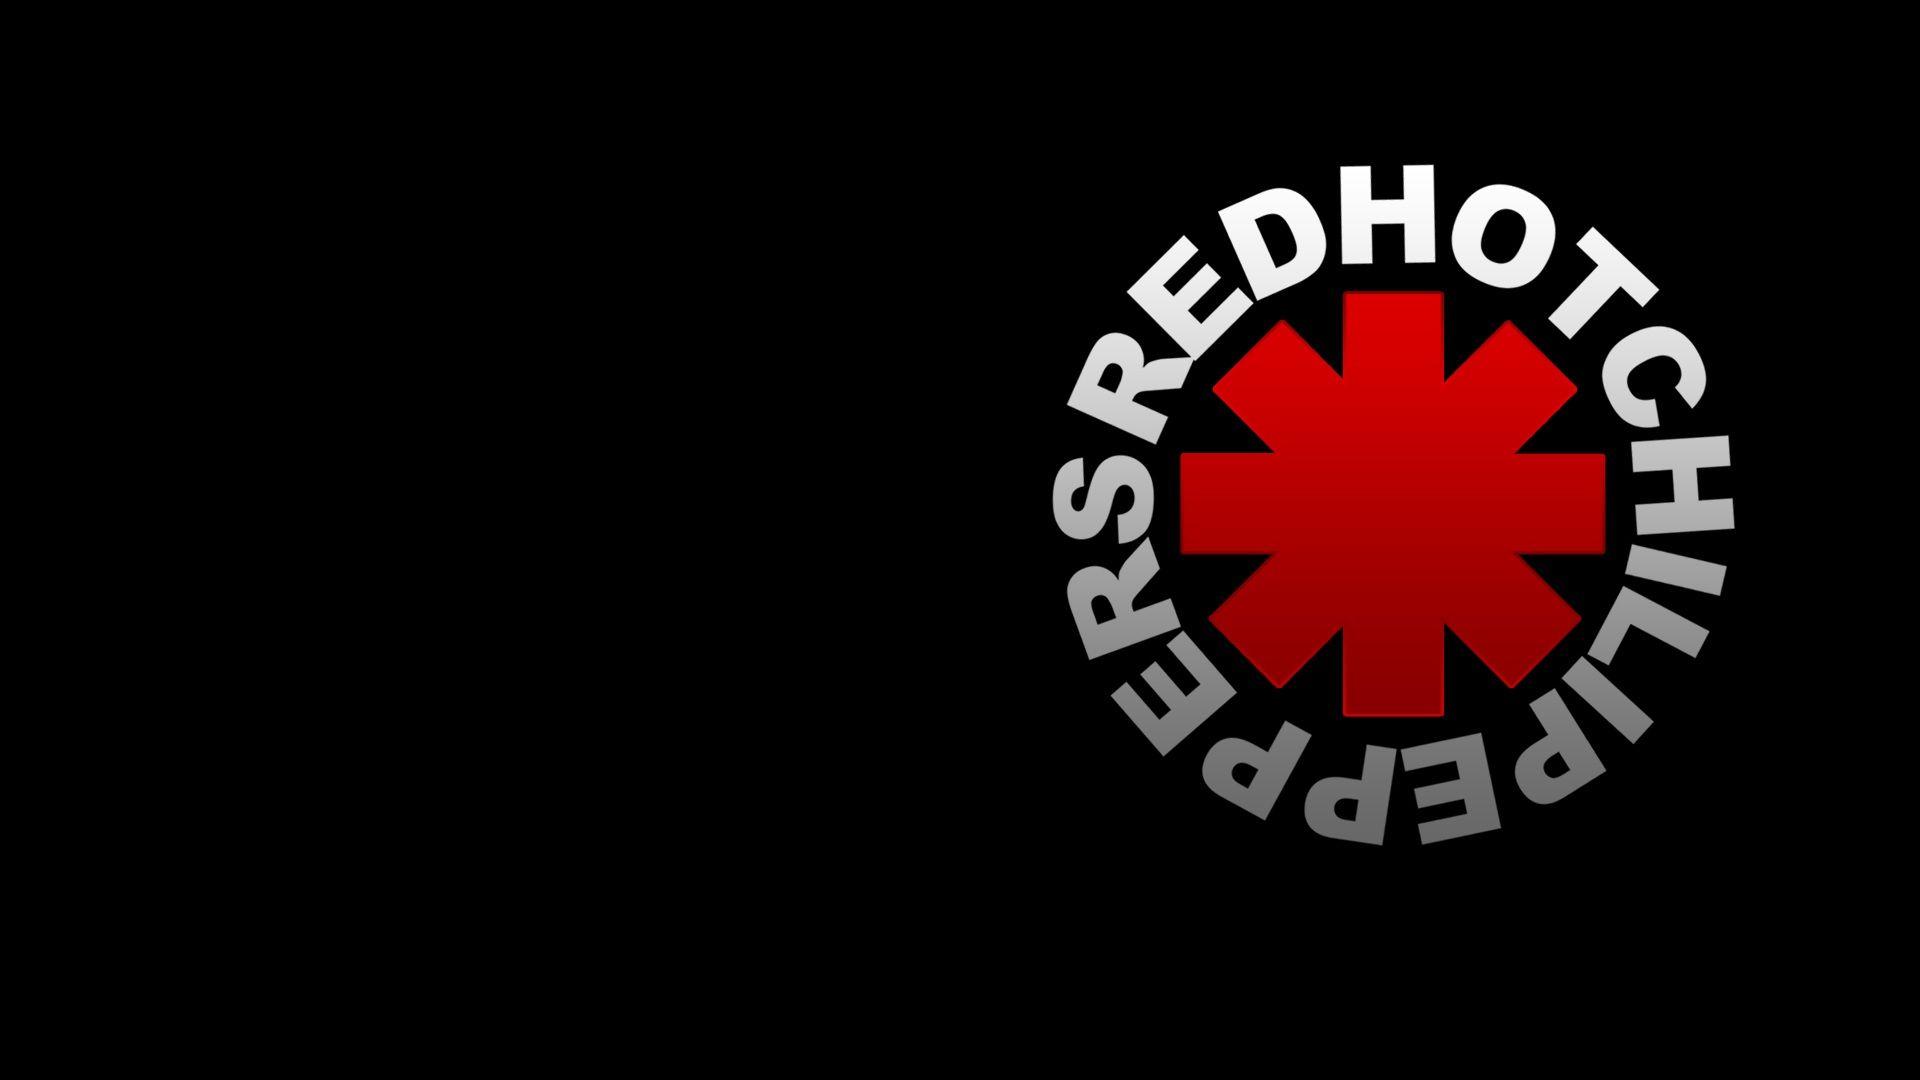 Red Hot Chili Peppers Wallpapers